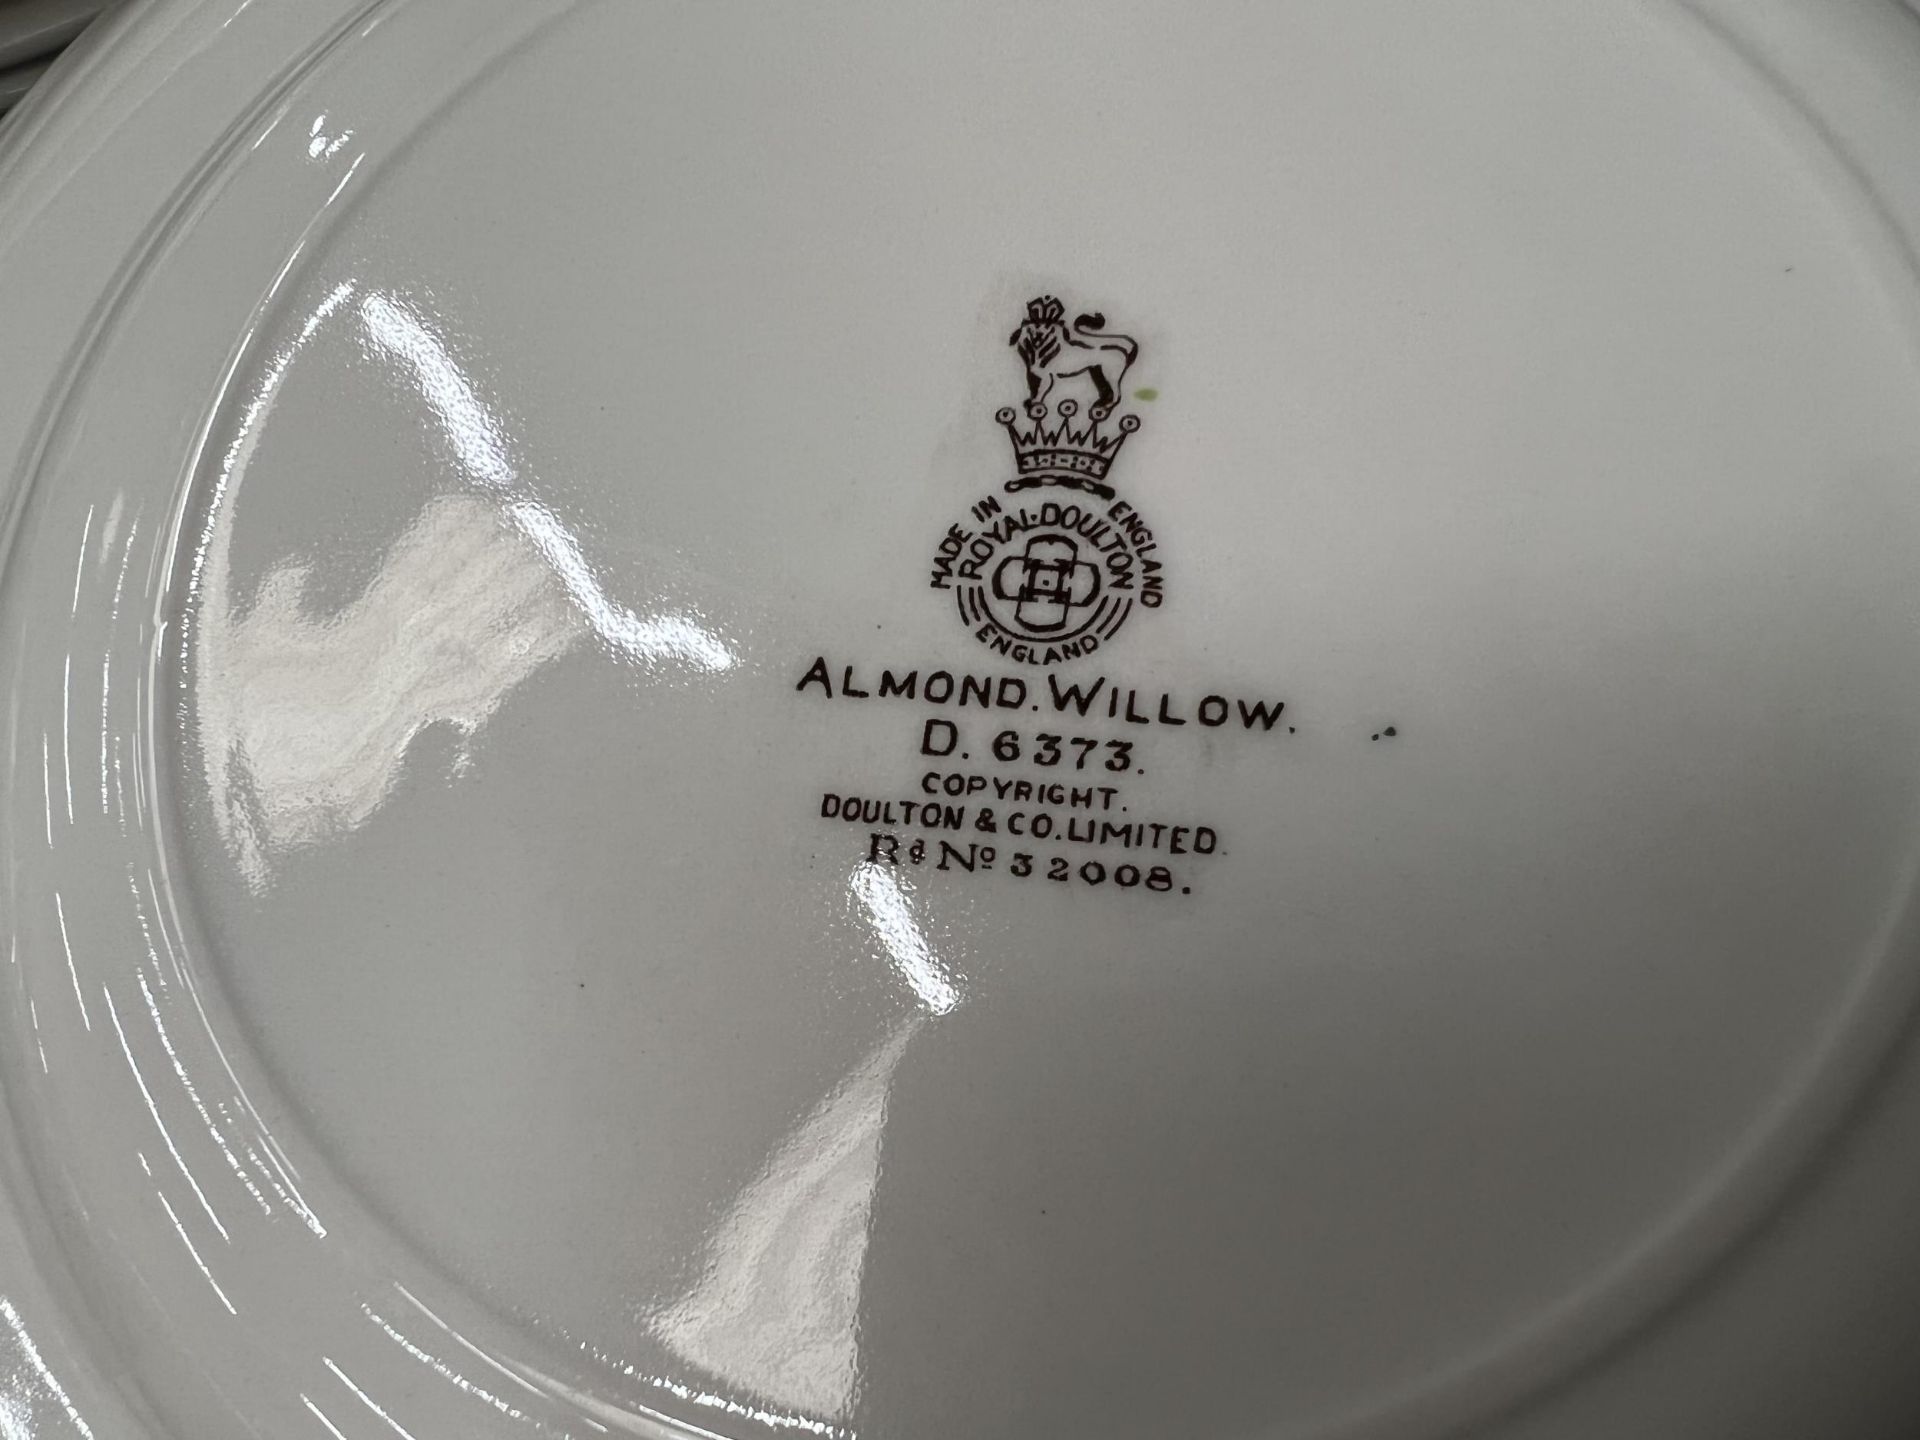 A ROYAL DOULTON 'ALMOND WILLOW' REG NO. 6373 DINNER SERVICE TO INCLUDE PLATES, TUREENS, DESSERT - Image 3 of 4